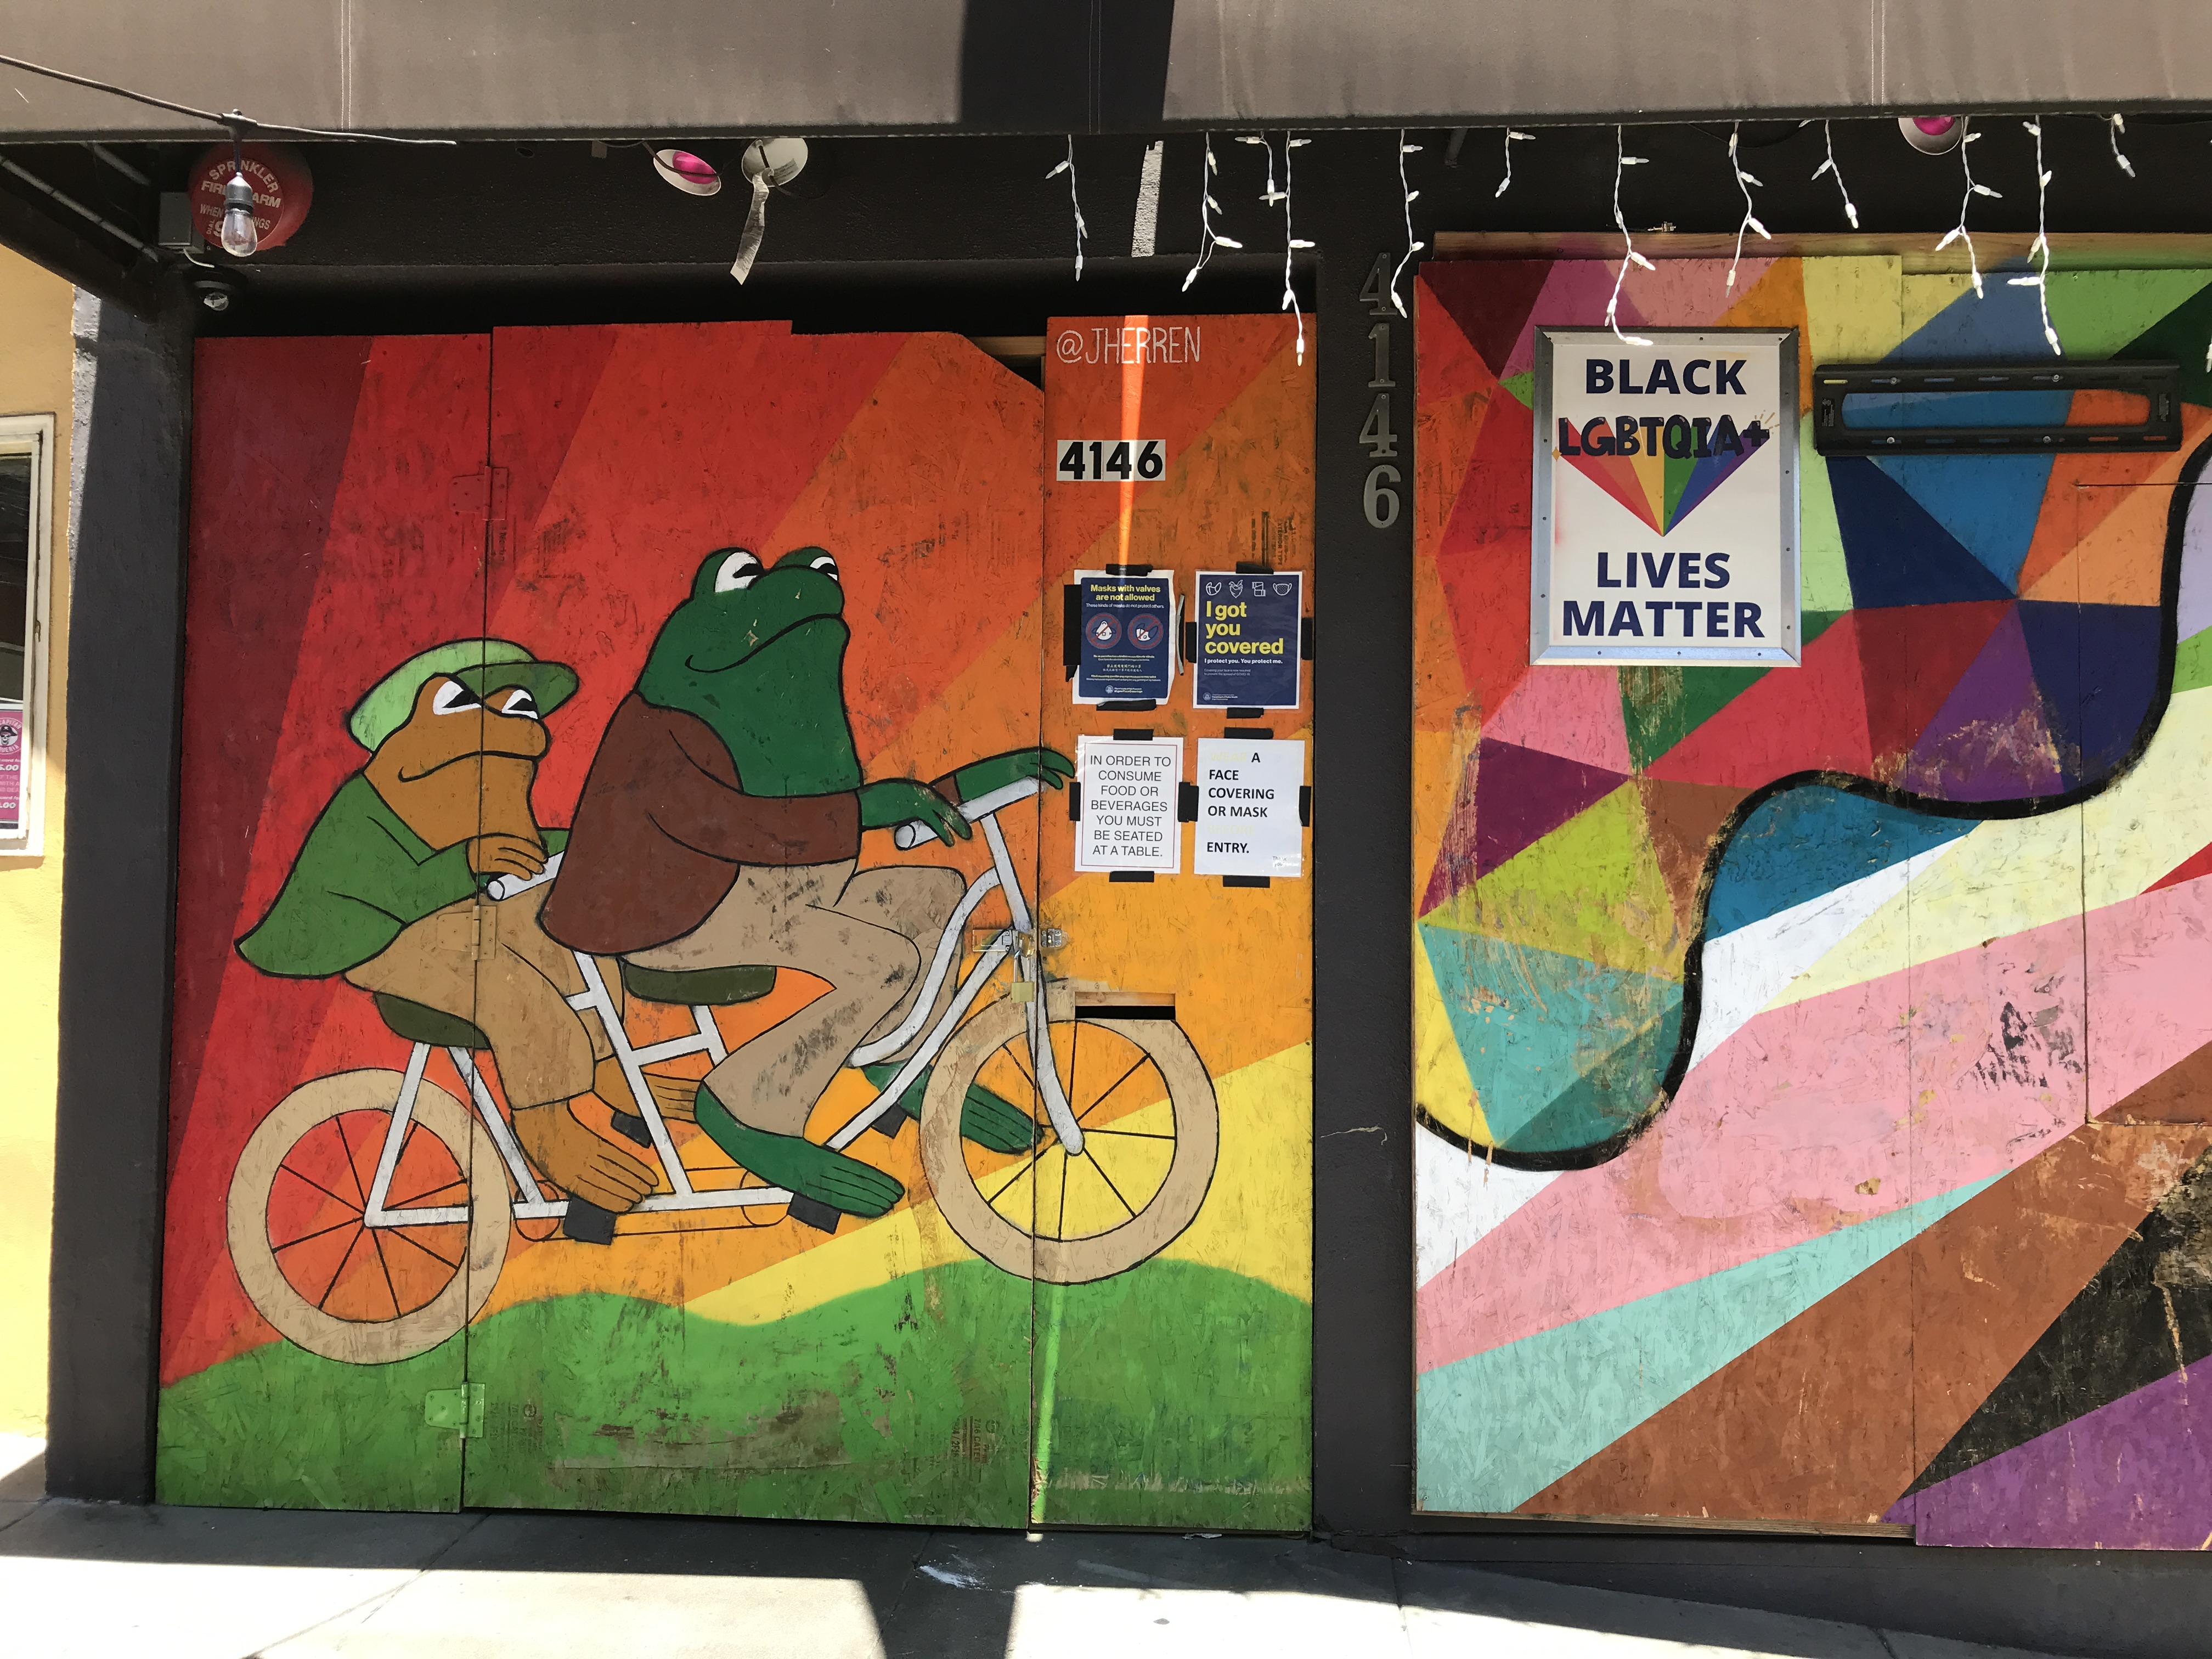 A rainbow mural on a wall featuring the book characters Frog and Toad riding on a bicycle together. The Castro District, San Francisco, California, United States of America